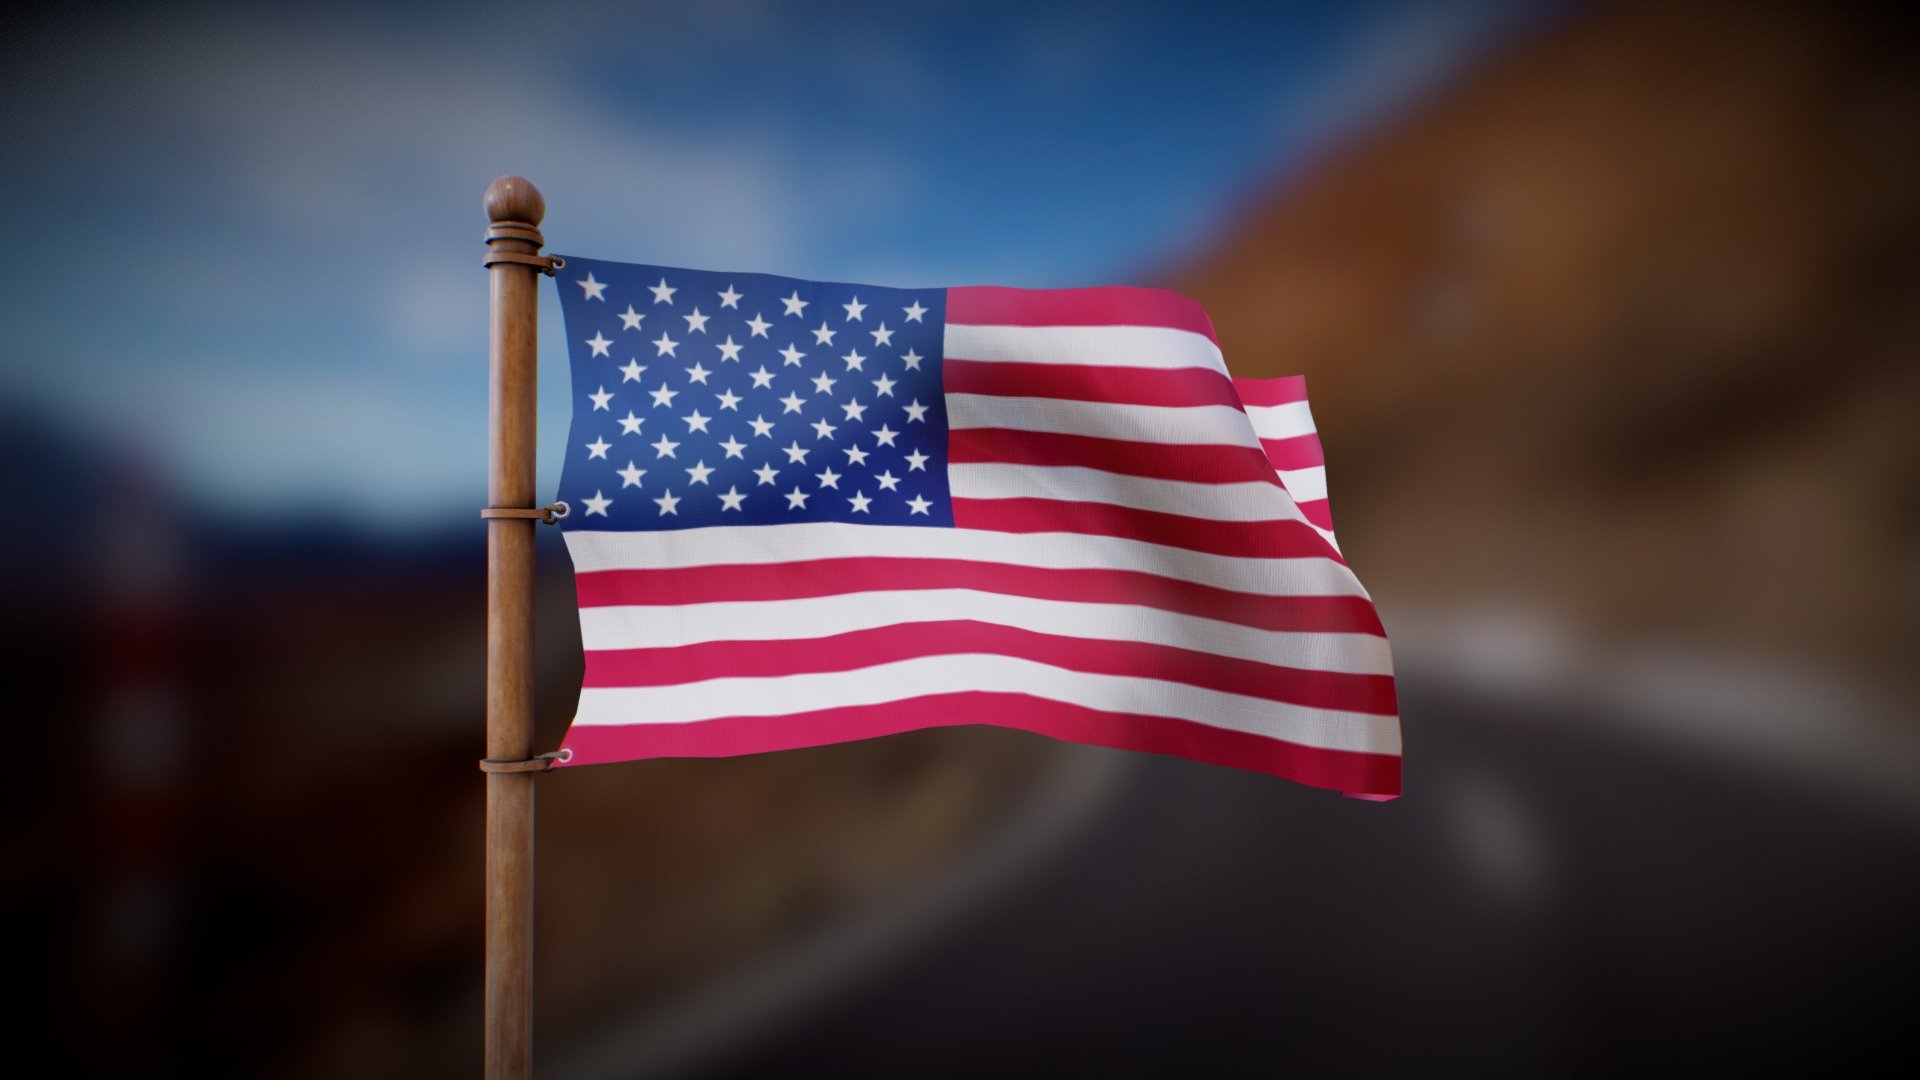 Flag waving in the wind in a looped animation

Joint Animation, perfect for any purpose
4K PBR textures

Feel free to DM me for anu question of custom requests :) - United States Flag - Wind Animated Loop - Buy Royalty Free 3D model by Deftroy 3d model